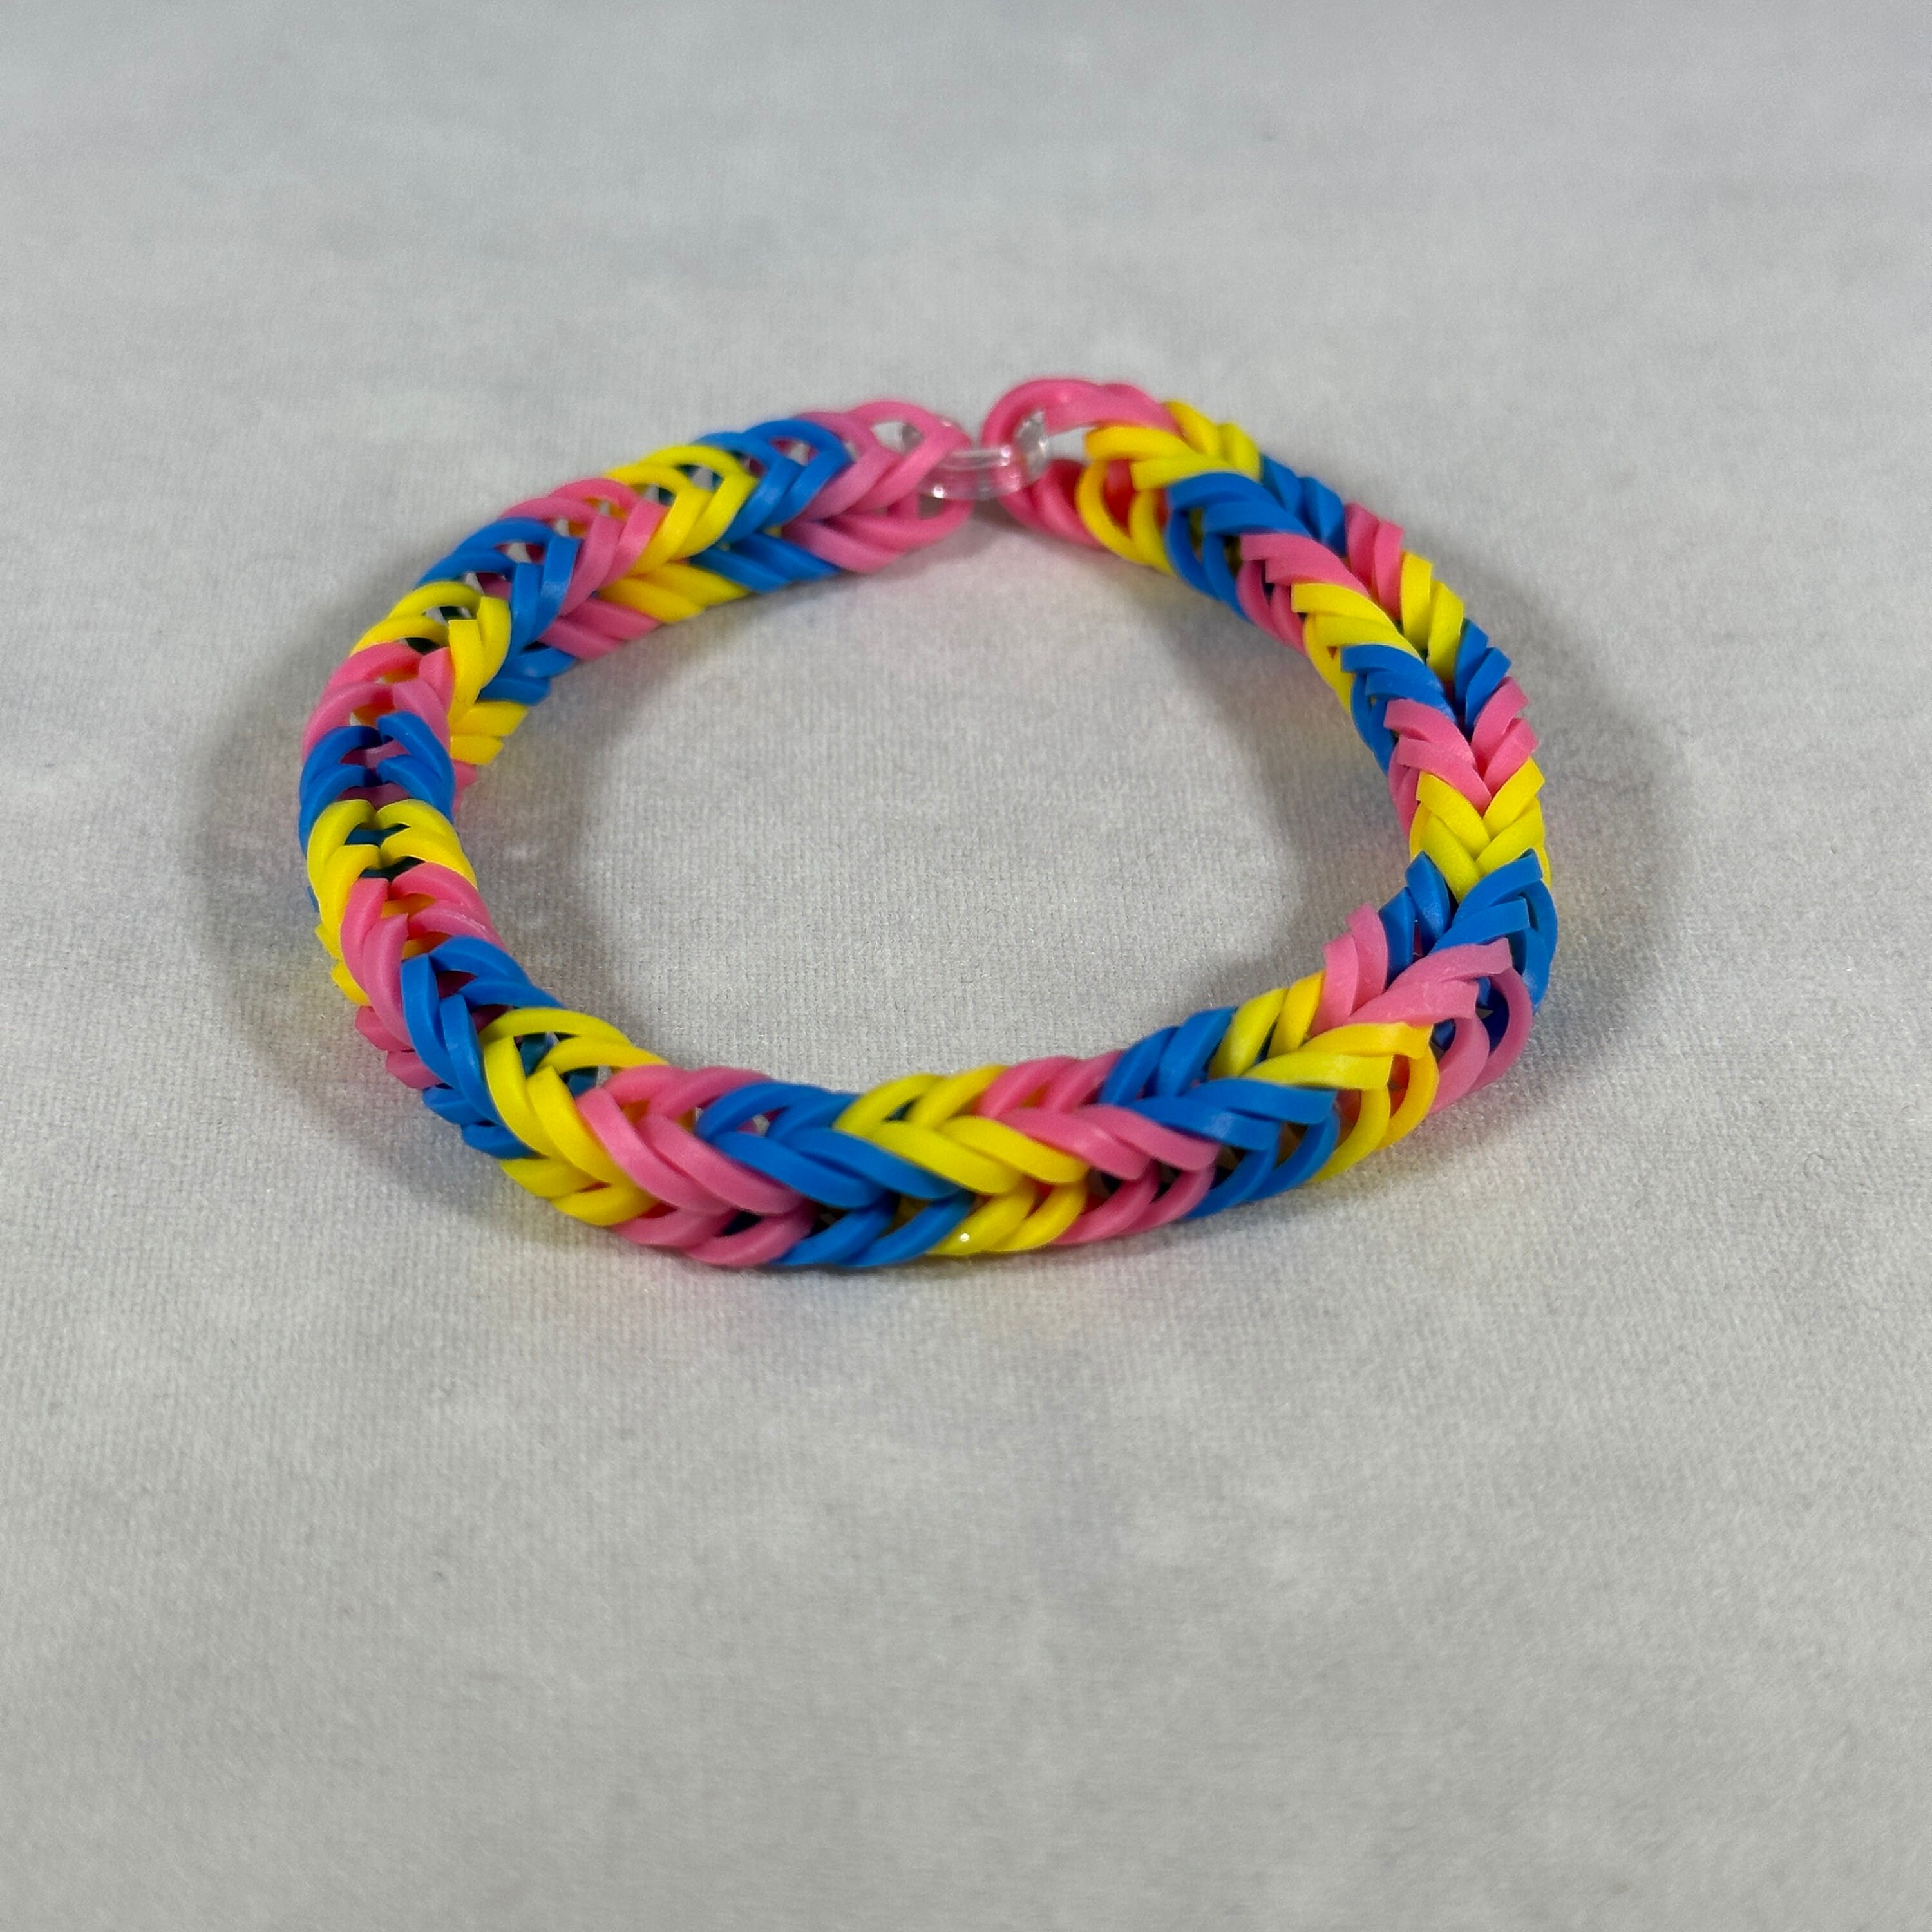 Hexafish Rainbow Loom Bracelet : 10 Steps (with Pictures) - Instructables